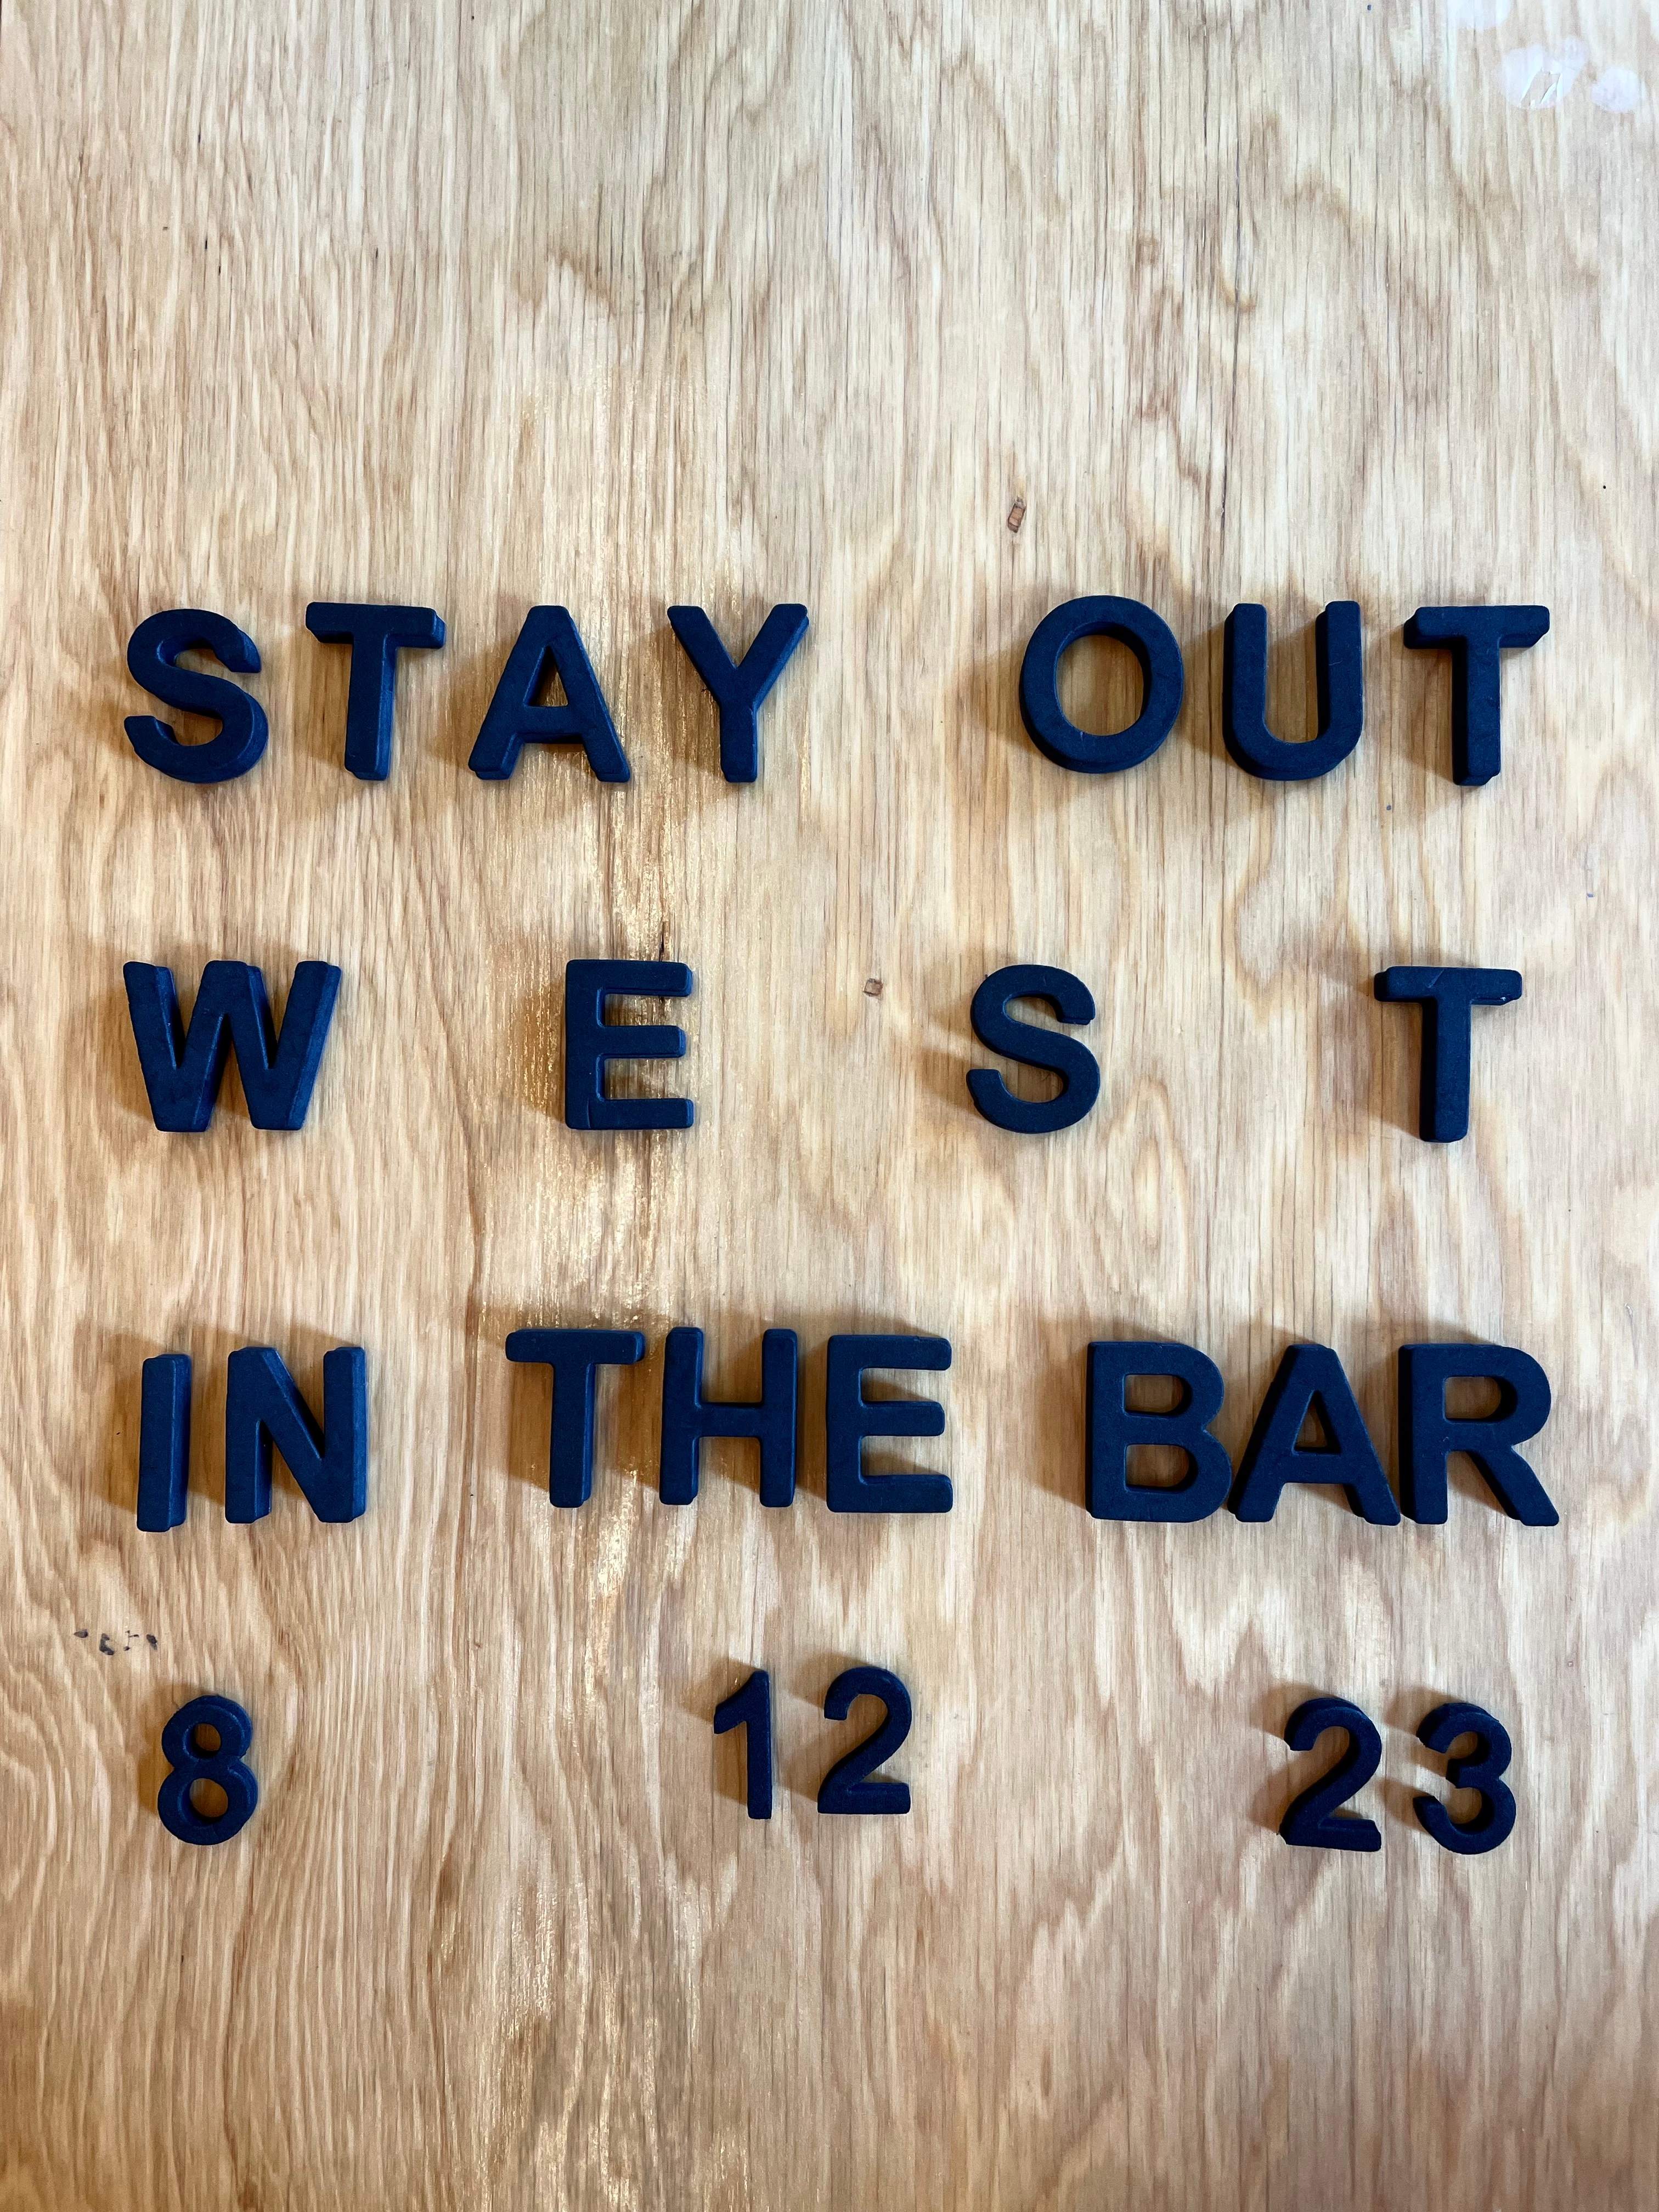 Stay Out West (DatKat & Donny Burlin) All night in the Cafe/Bar - フライヤー裏